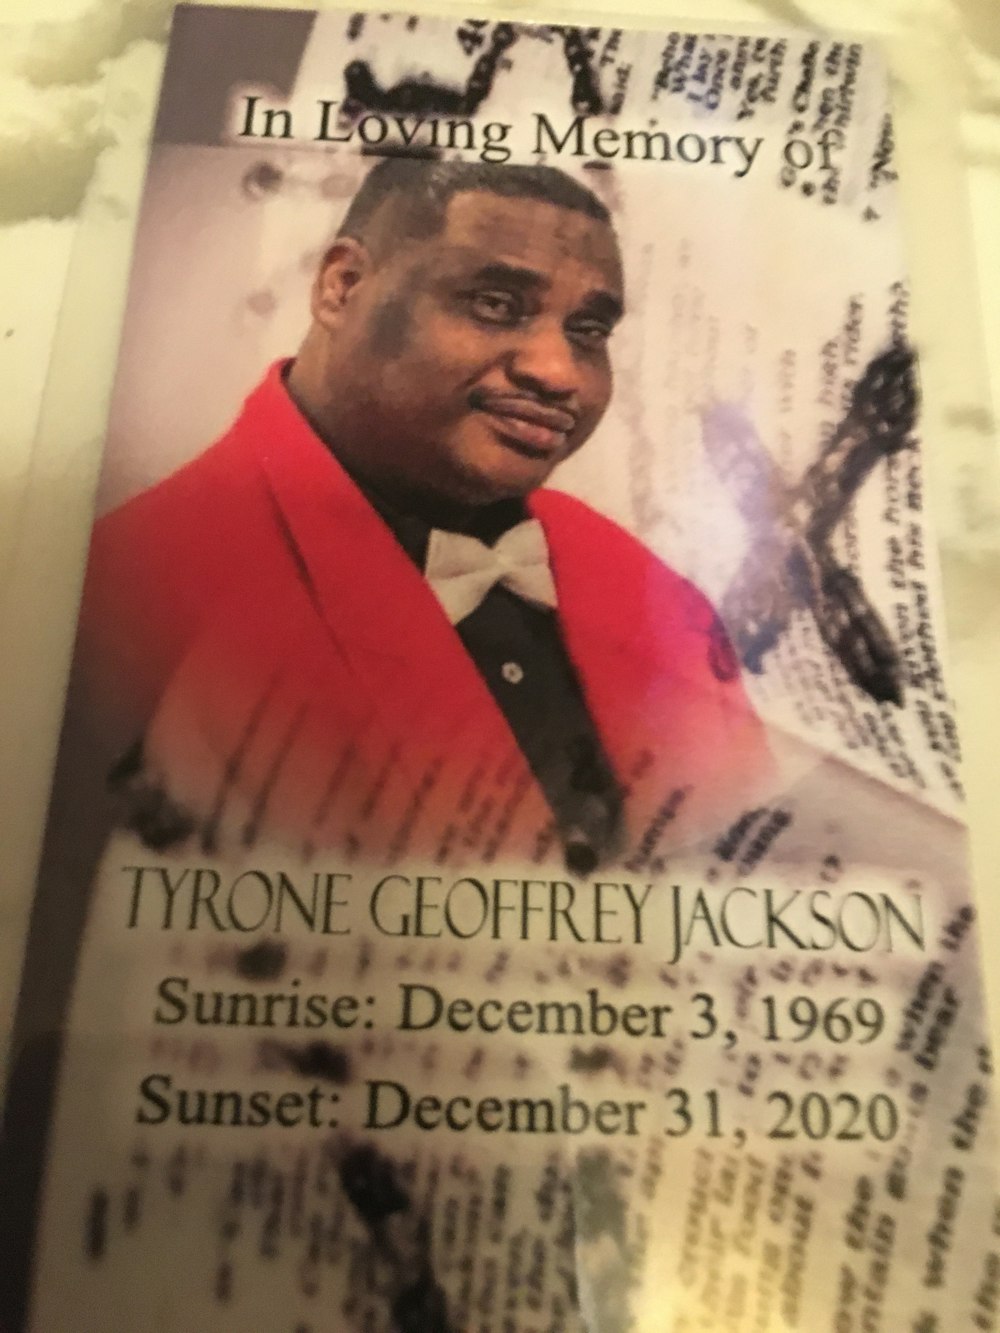 Goodbye to a great friend Tyrone Jackson of breakthrough.